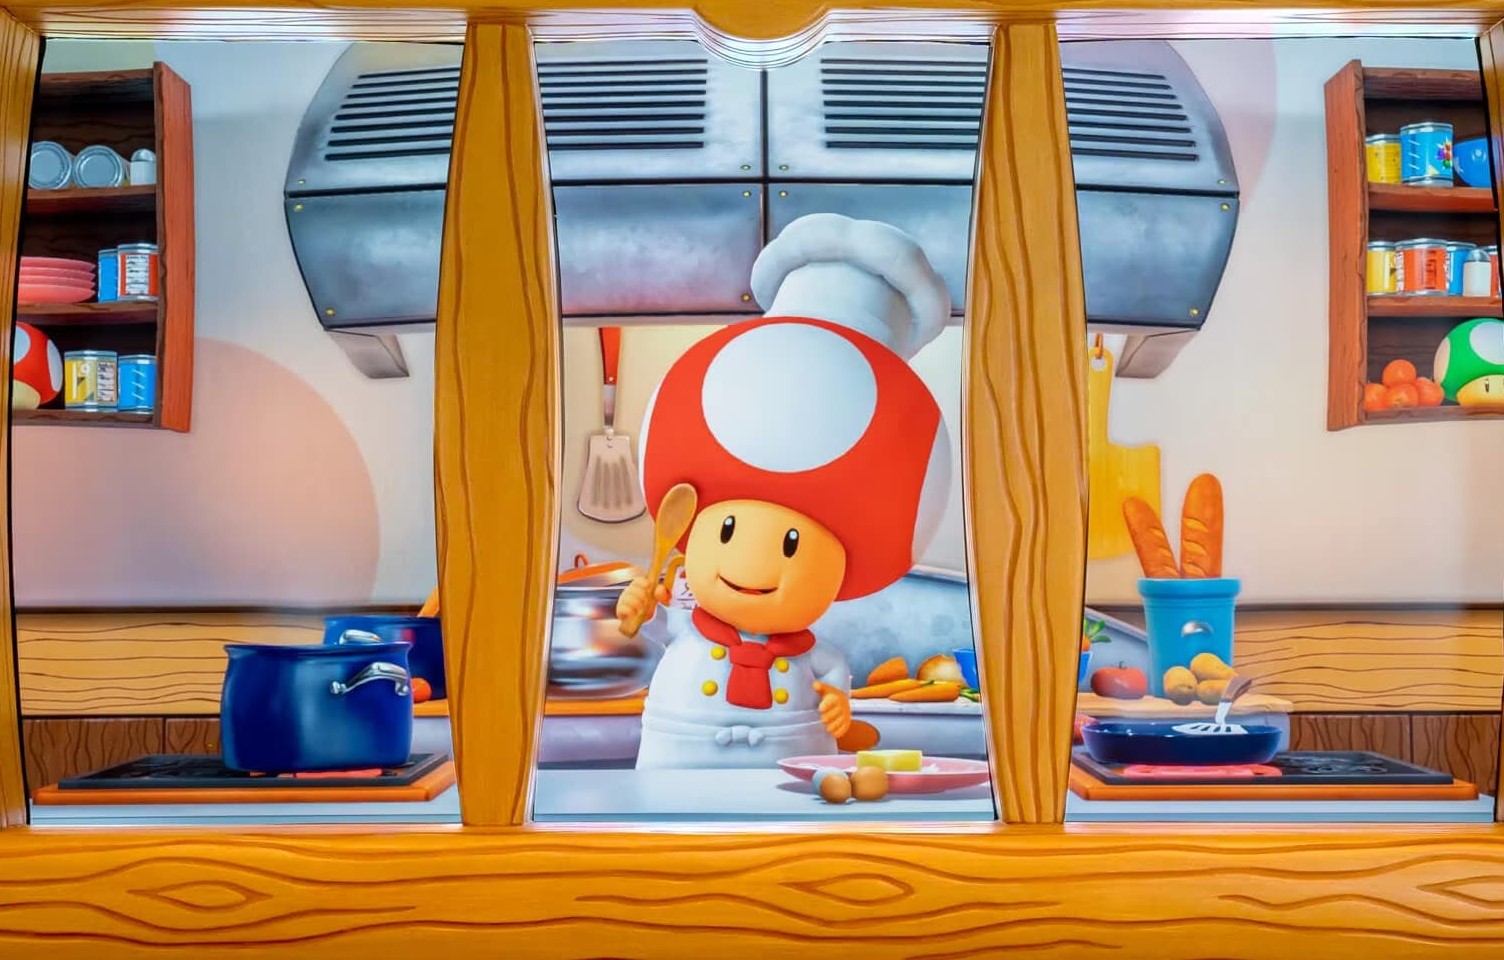 Toad from Super Mario stands in a kitchen wearing a chef outfit. He is holding a little wooden spoon with ingredients evocative of various Super Mario items and Power Ups around him.